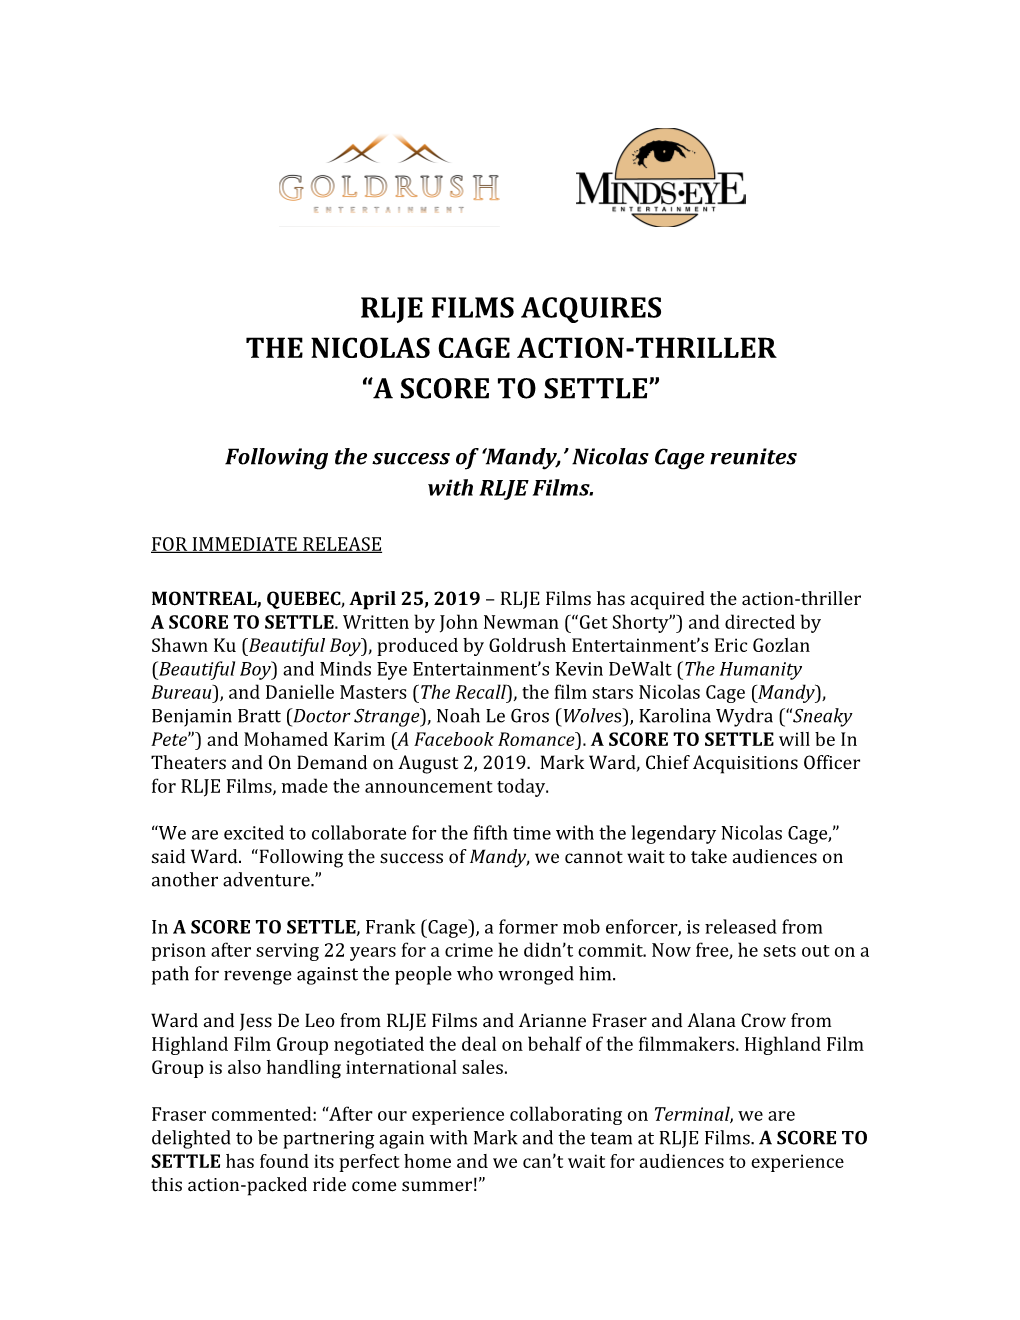 Rlje Films Acquires the Nicolas Cage Action-Thriller “A Score to Settle”